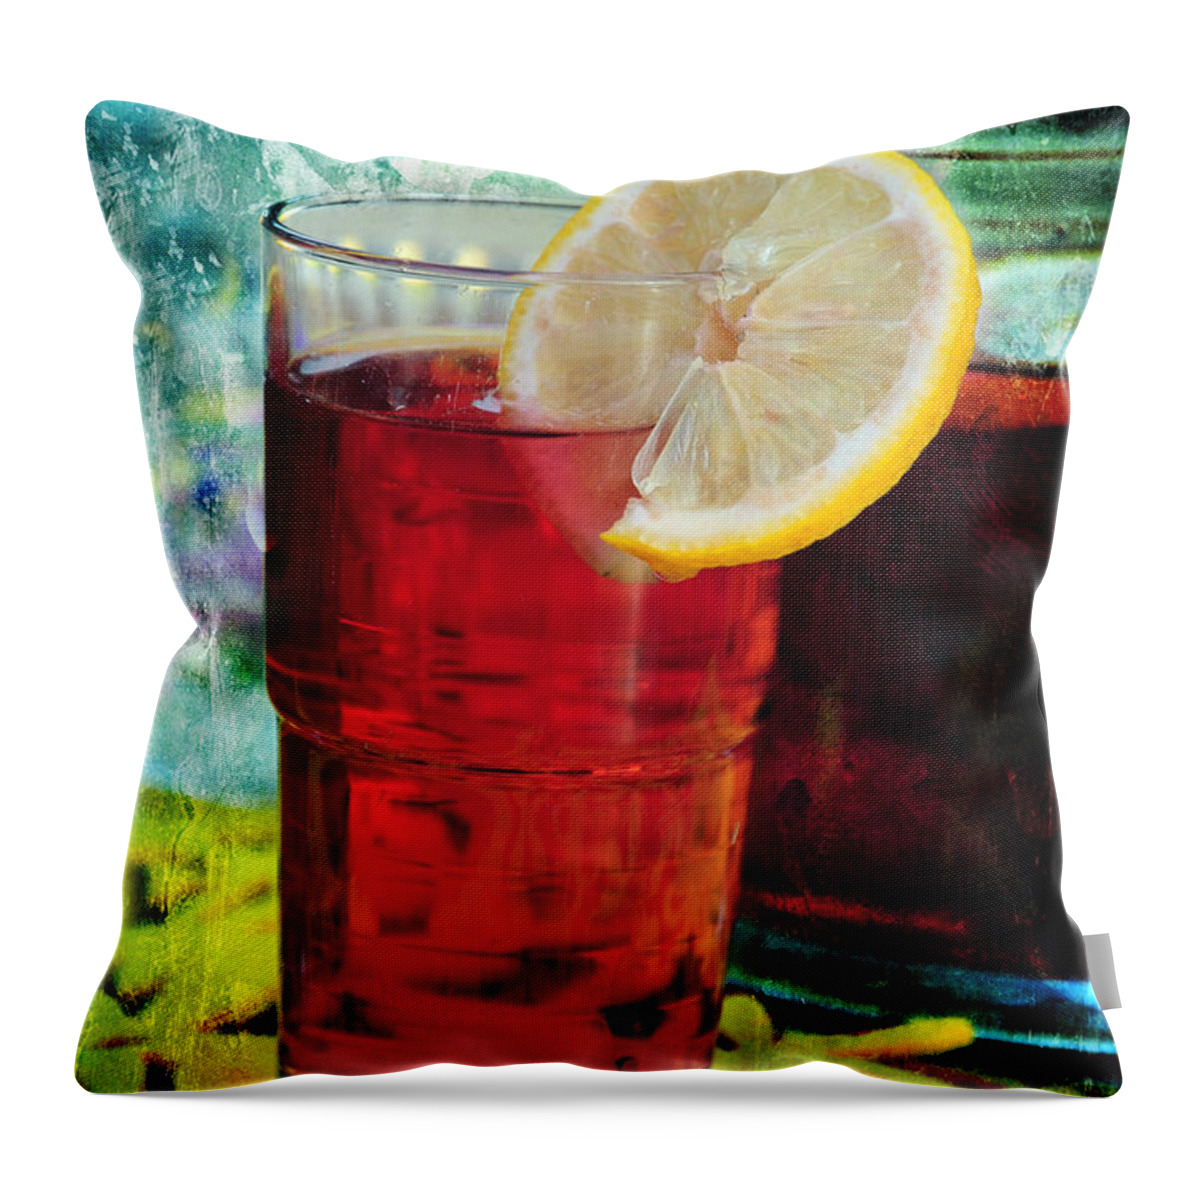 Fruit Throw Pillow featuring the photograph Quench My Thirst by Randi Grace Nilsberg